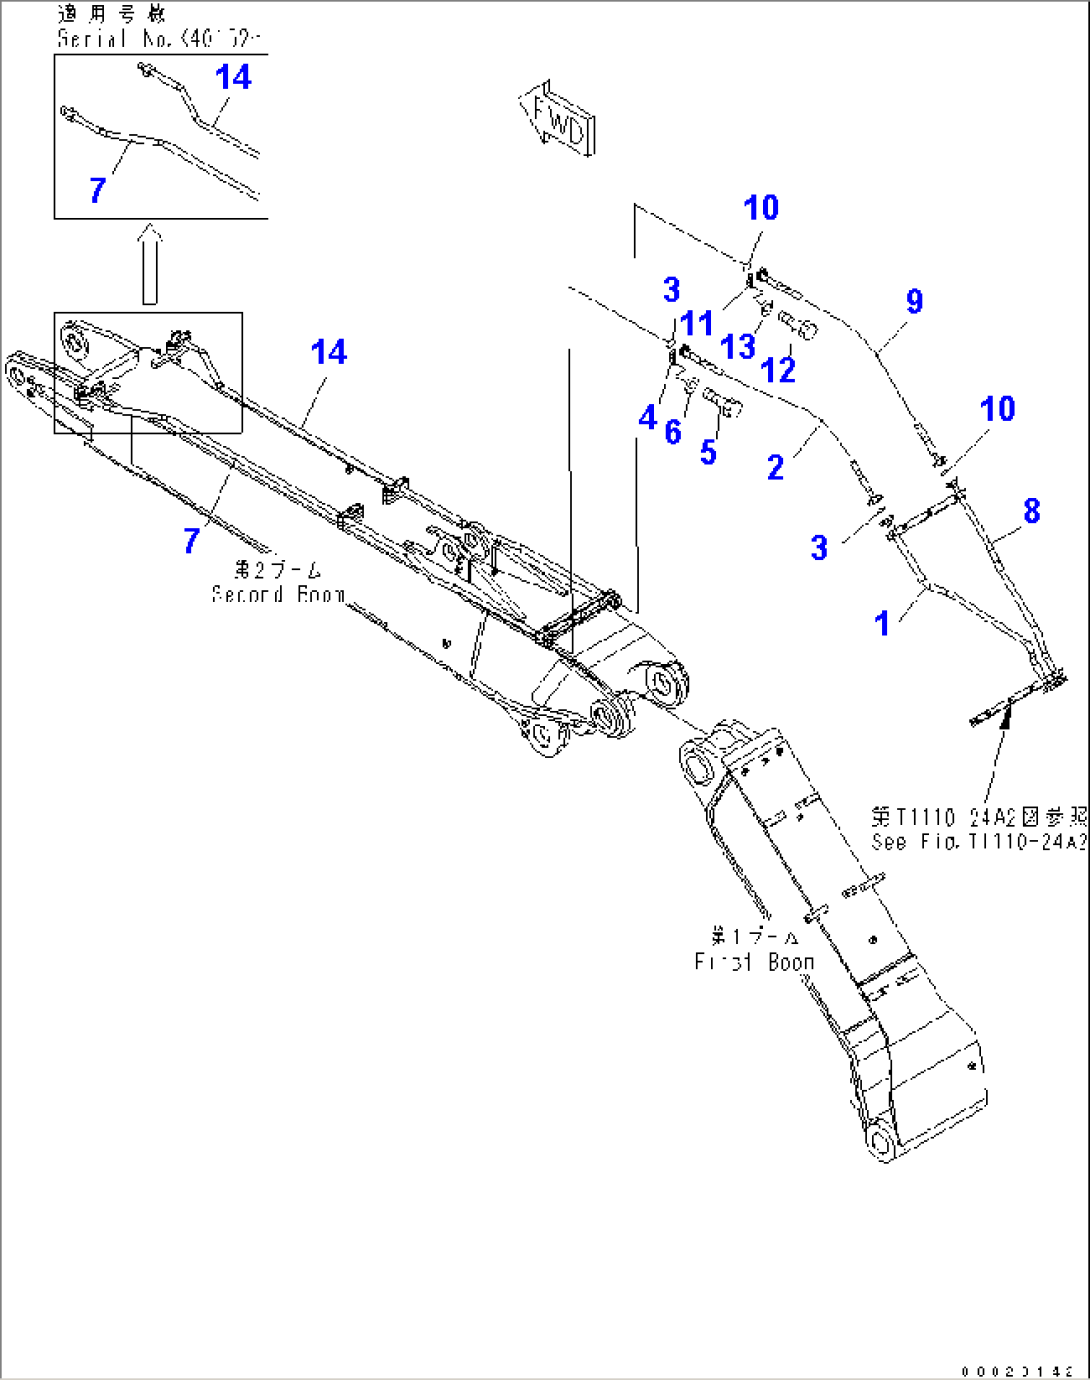 2-PIECE BOOM (ADDITIONAL PIPING) (CLAMSHELL LINE) (PIPING)